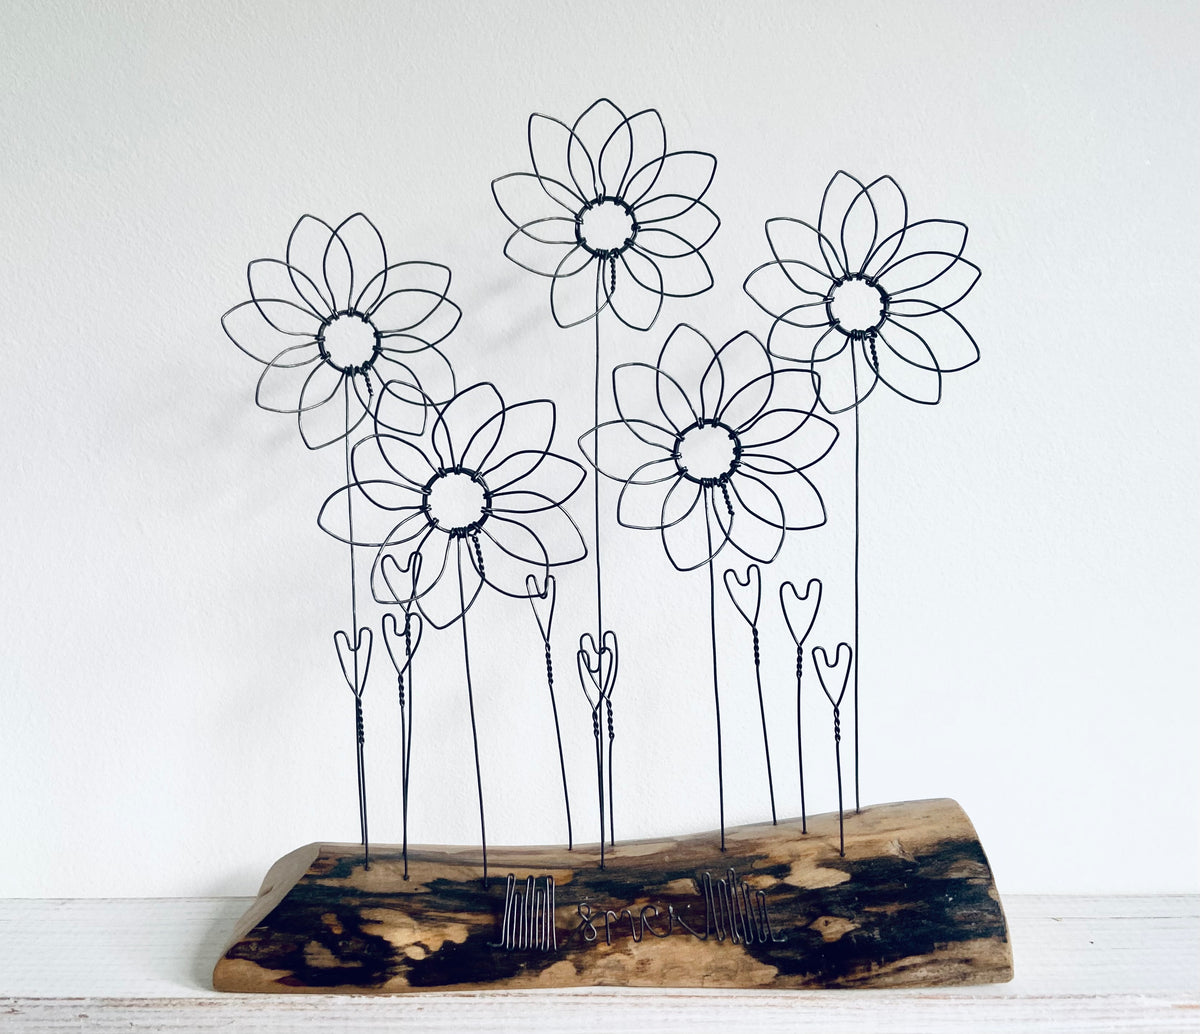 "Anemones" - freestanding wire and waxed driftwood scupture by Wild Grey Art